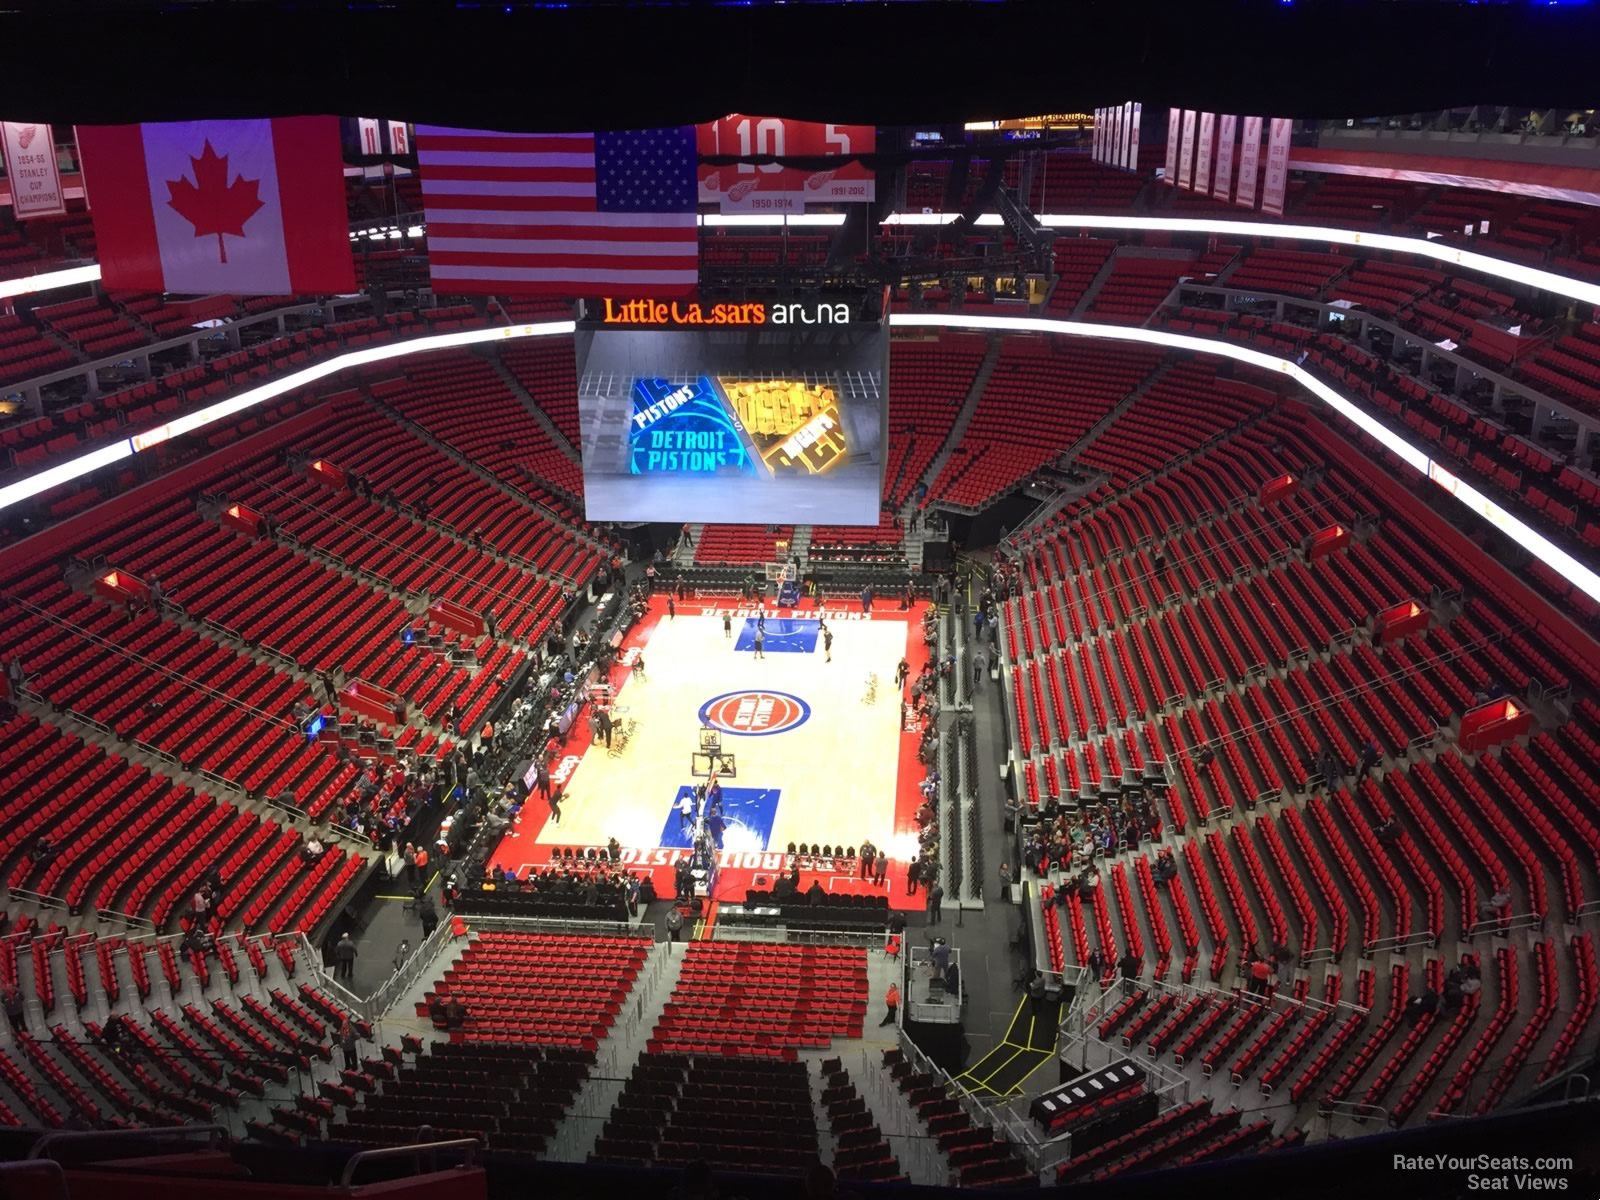 section 218, row 12 seat view  for basketball - little caesars arena